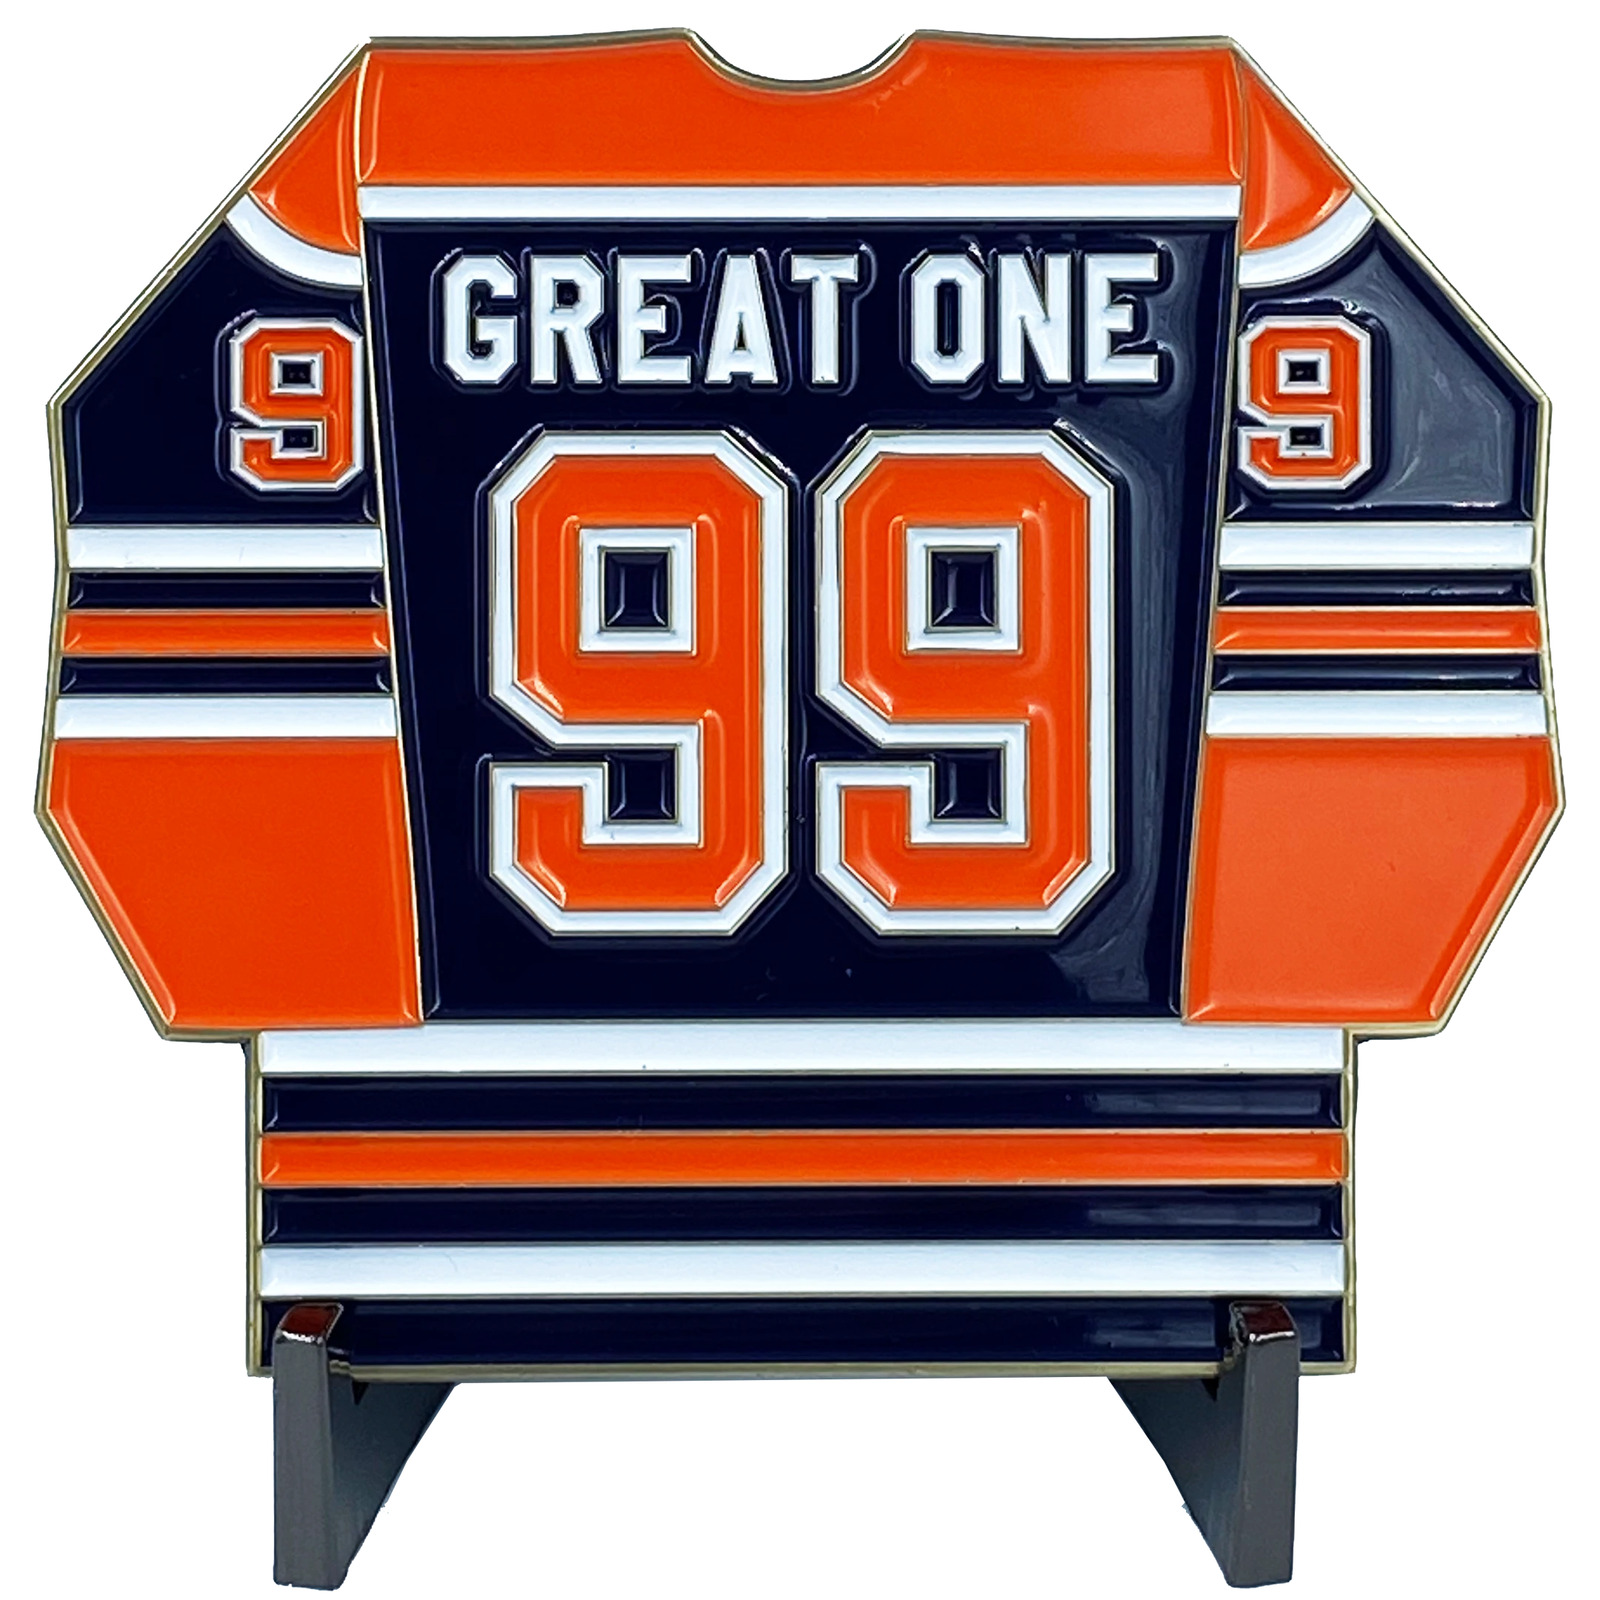 DL11-08 The Great One Challenge Coin Inspired by Wayne Gretzky 99 Edmonton Jerse